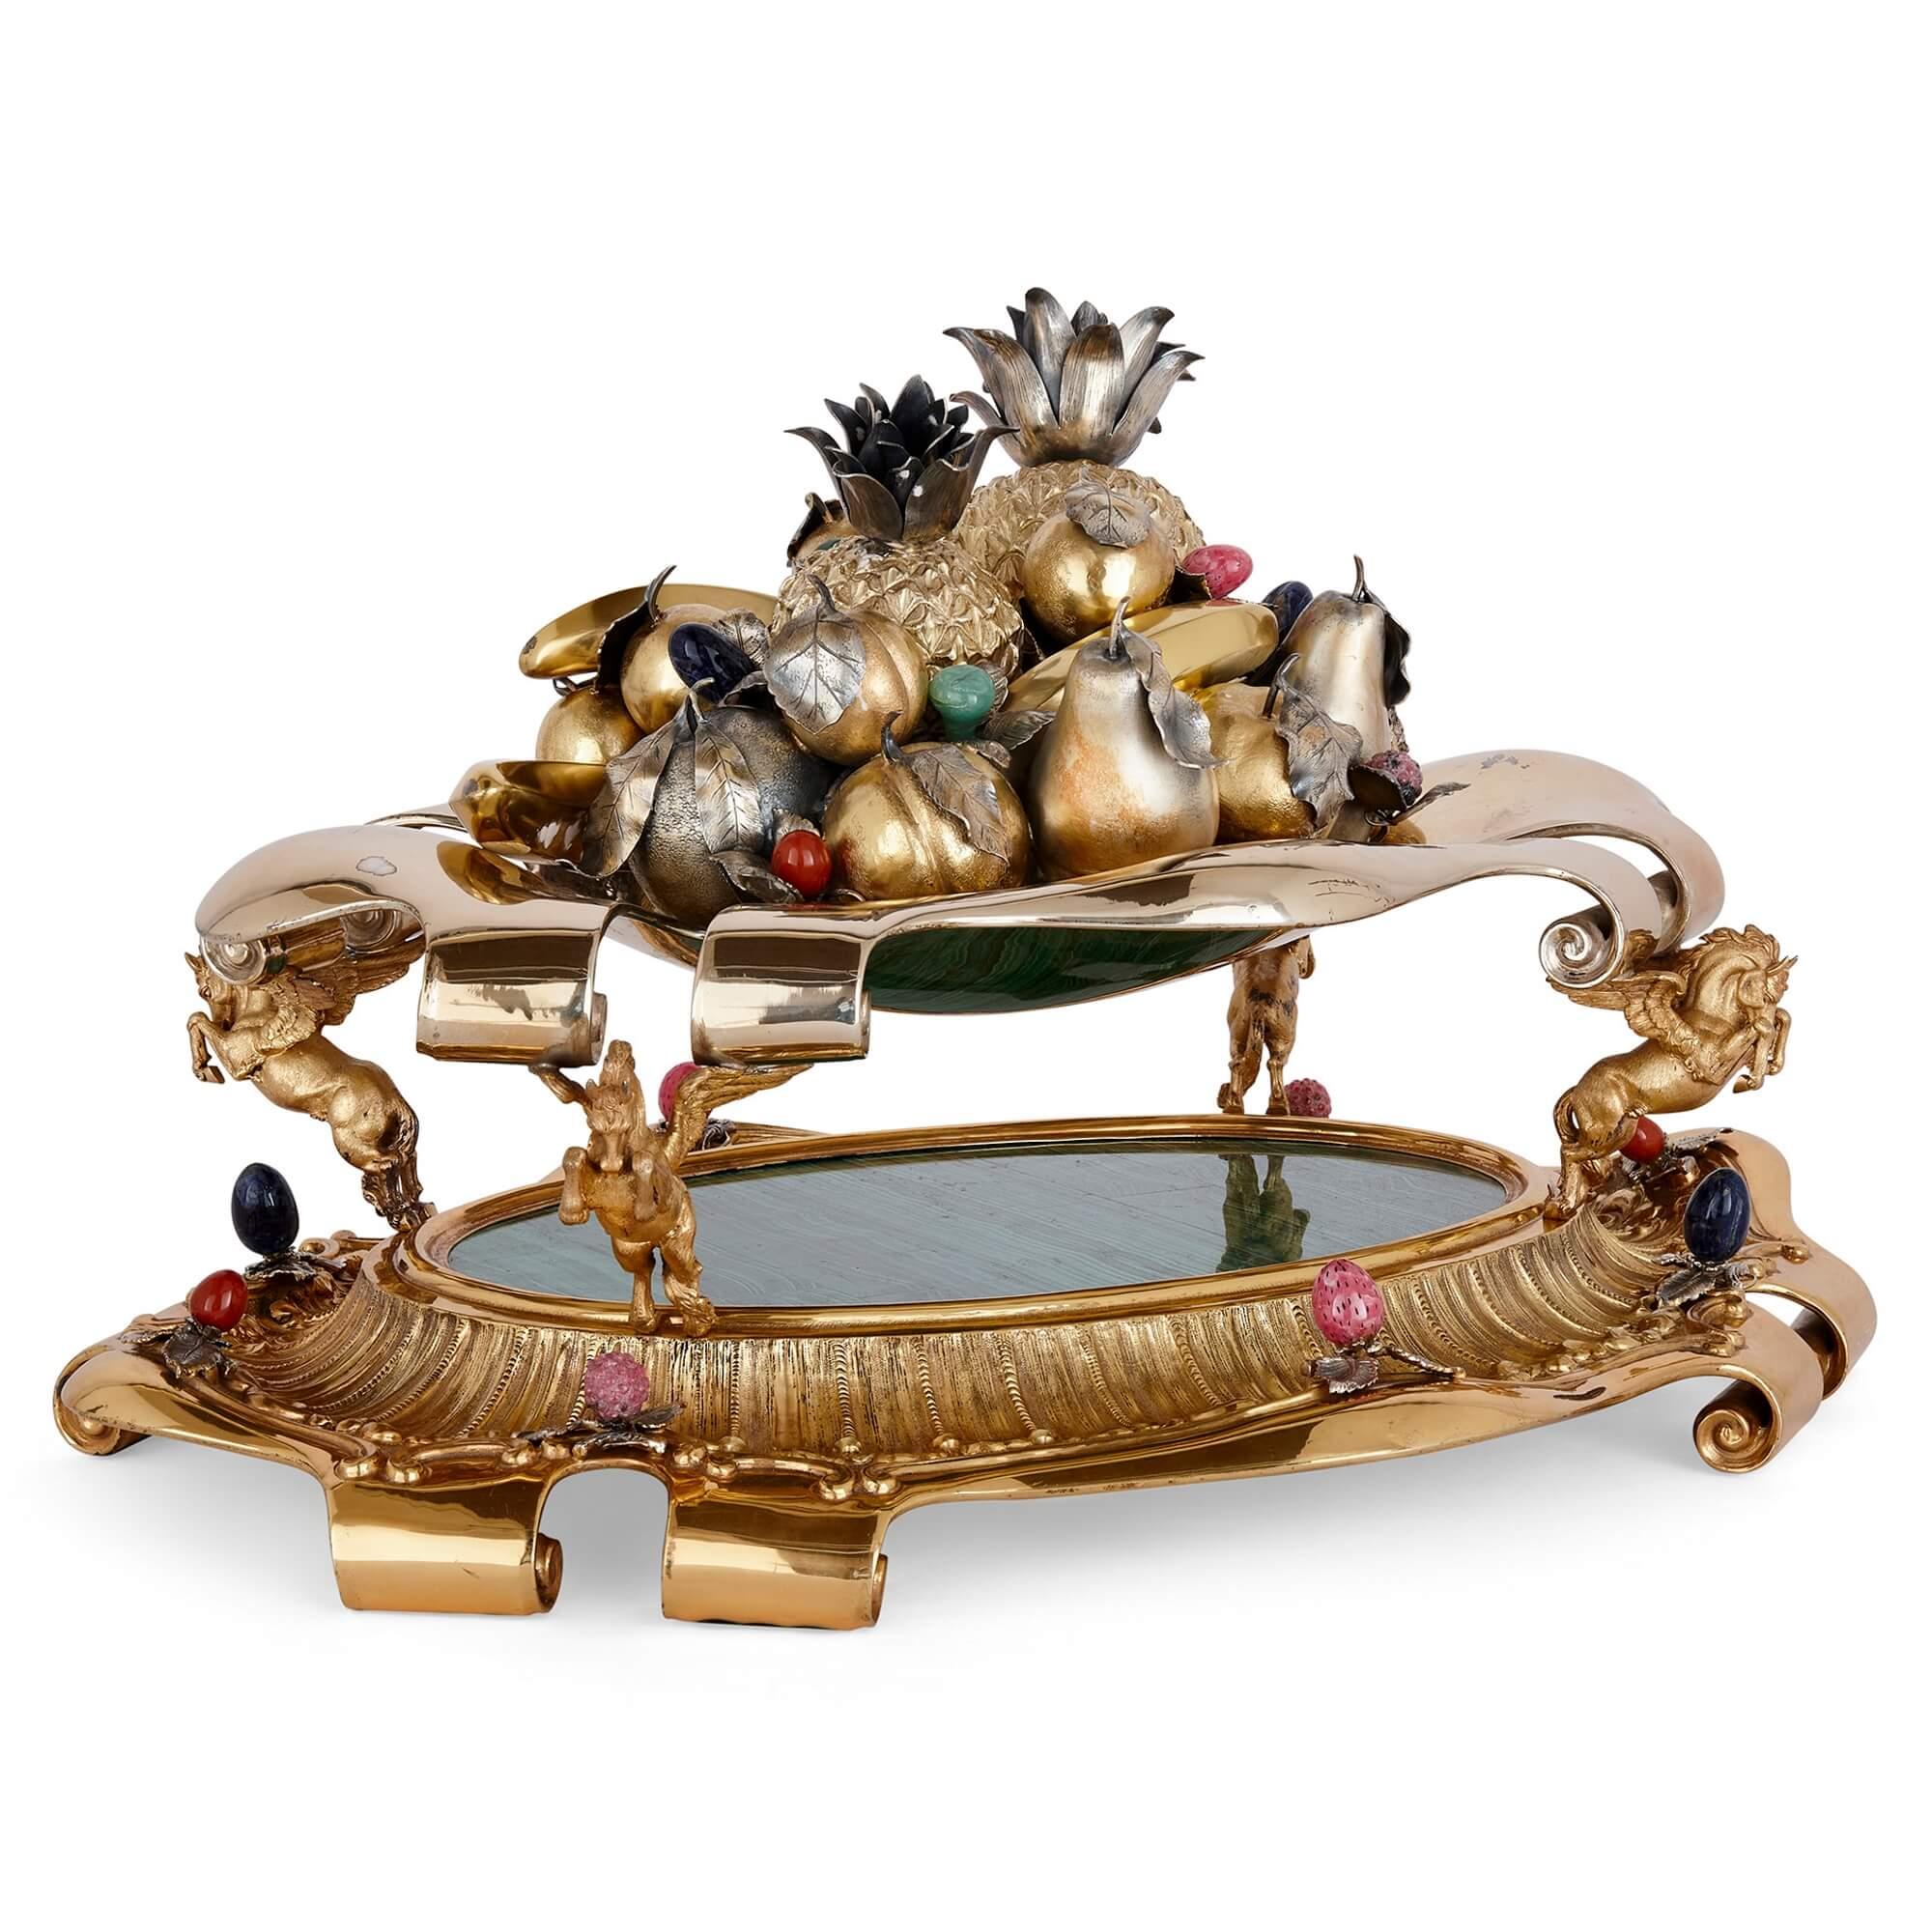 Large Italian parcel-gilt, silver, and hardstone centrepiece from Milan, c.1980
Italian, Late 20th Century
Weight: 14.064 kg
Height 40cm, width 69cm, depth 52cm

Bearing the mark of Argenteria Fiorentini & Spertini, of Milan, c.1980, this